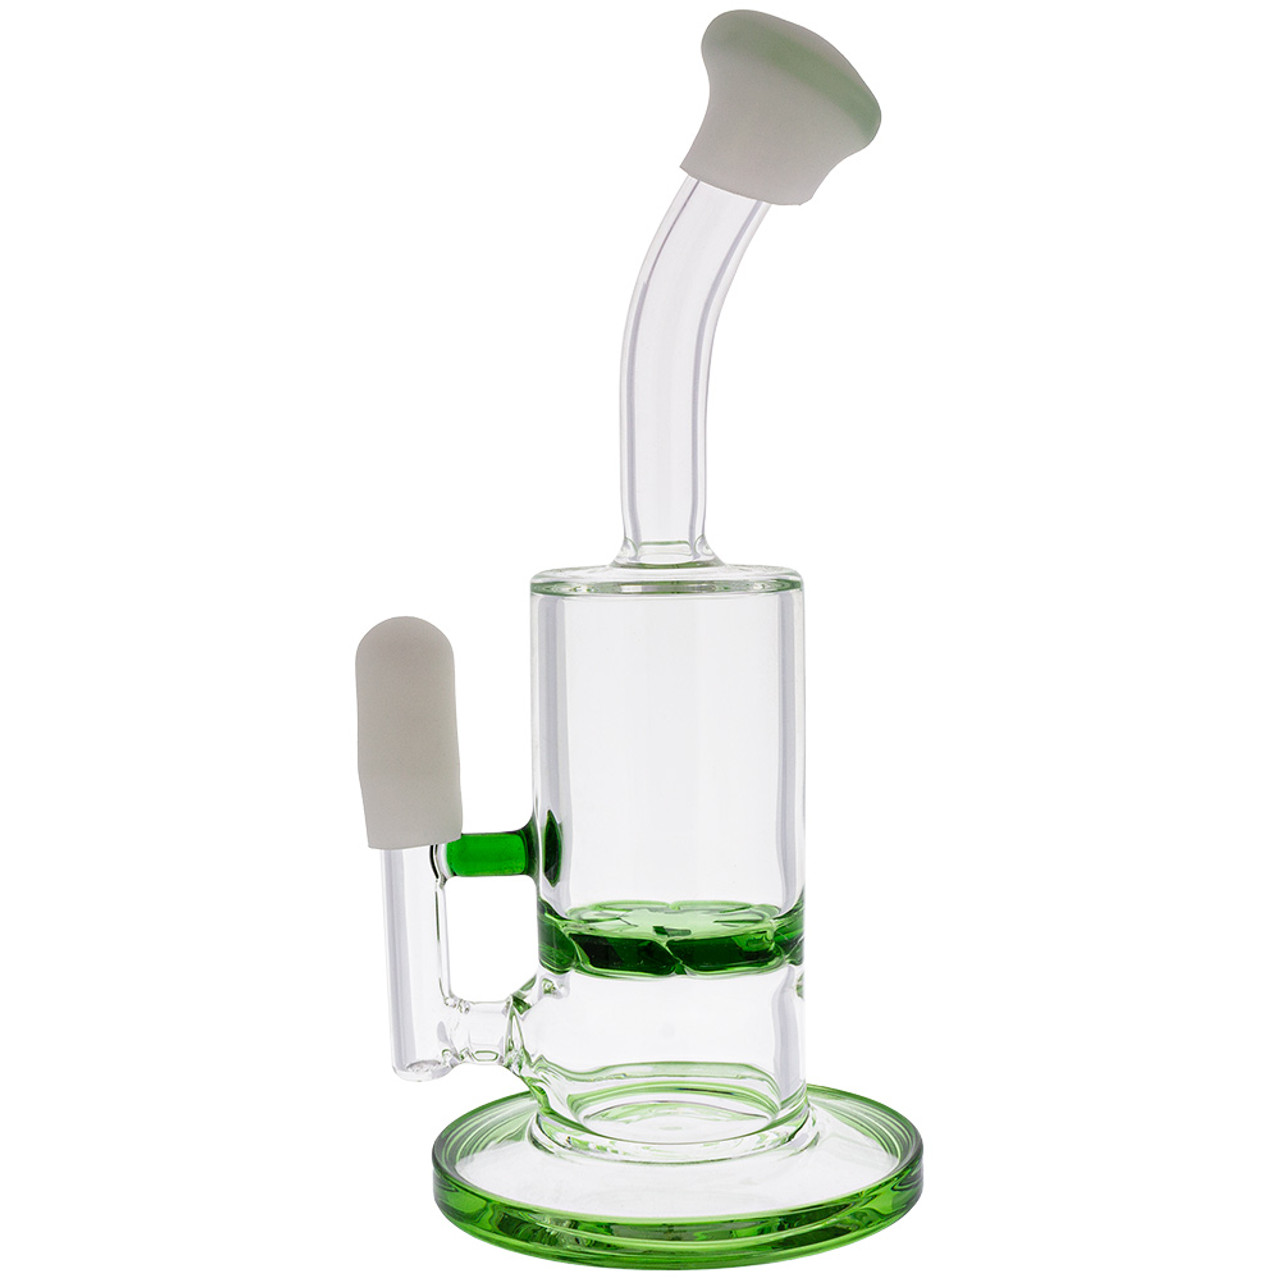 I like Formula 420 for cleaning my 'glassware' - Boing Boing